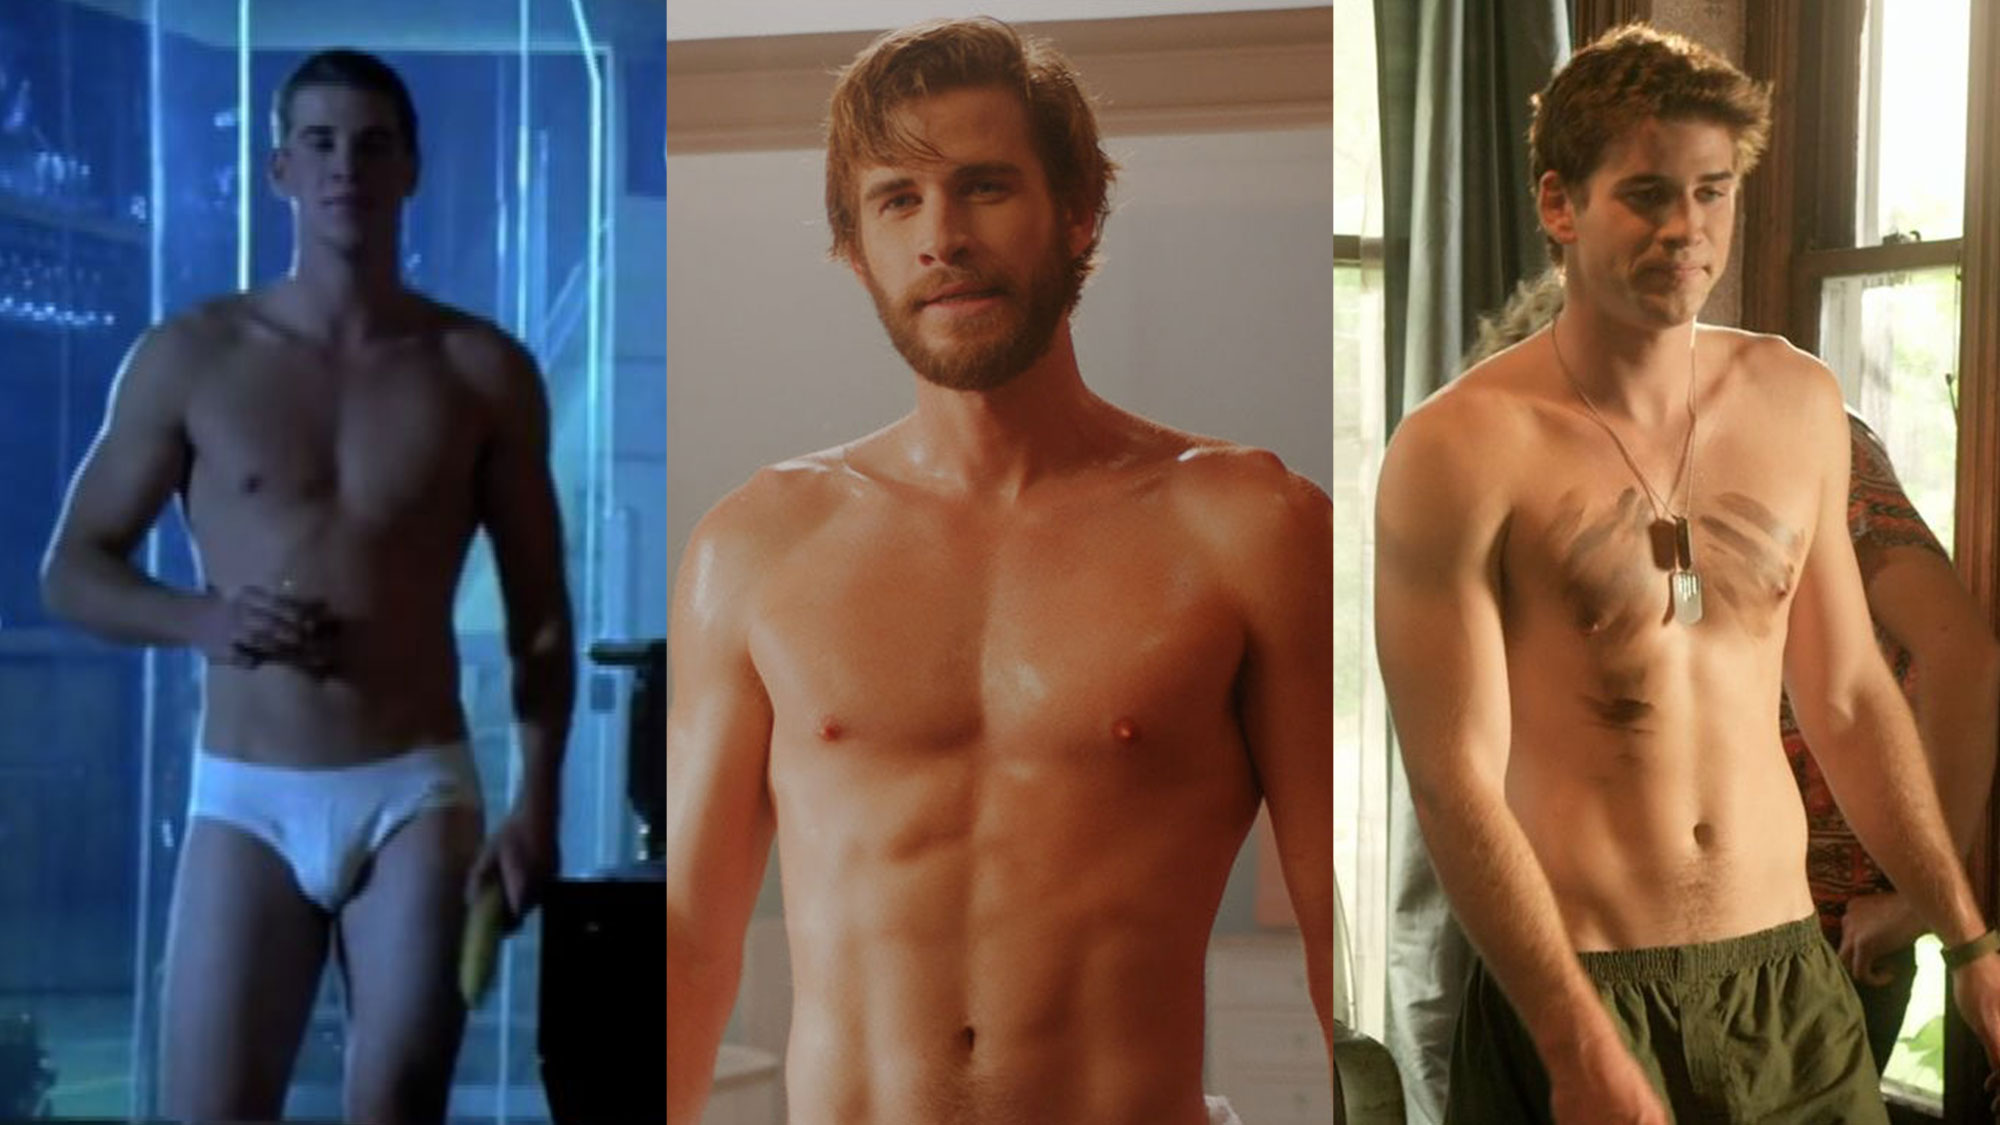 Celebrate Liam Hemsworth's BDay With His Rare, ONLY Nude Scene - TheSword.com